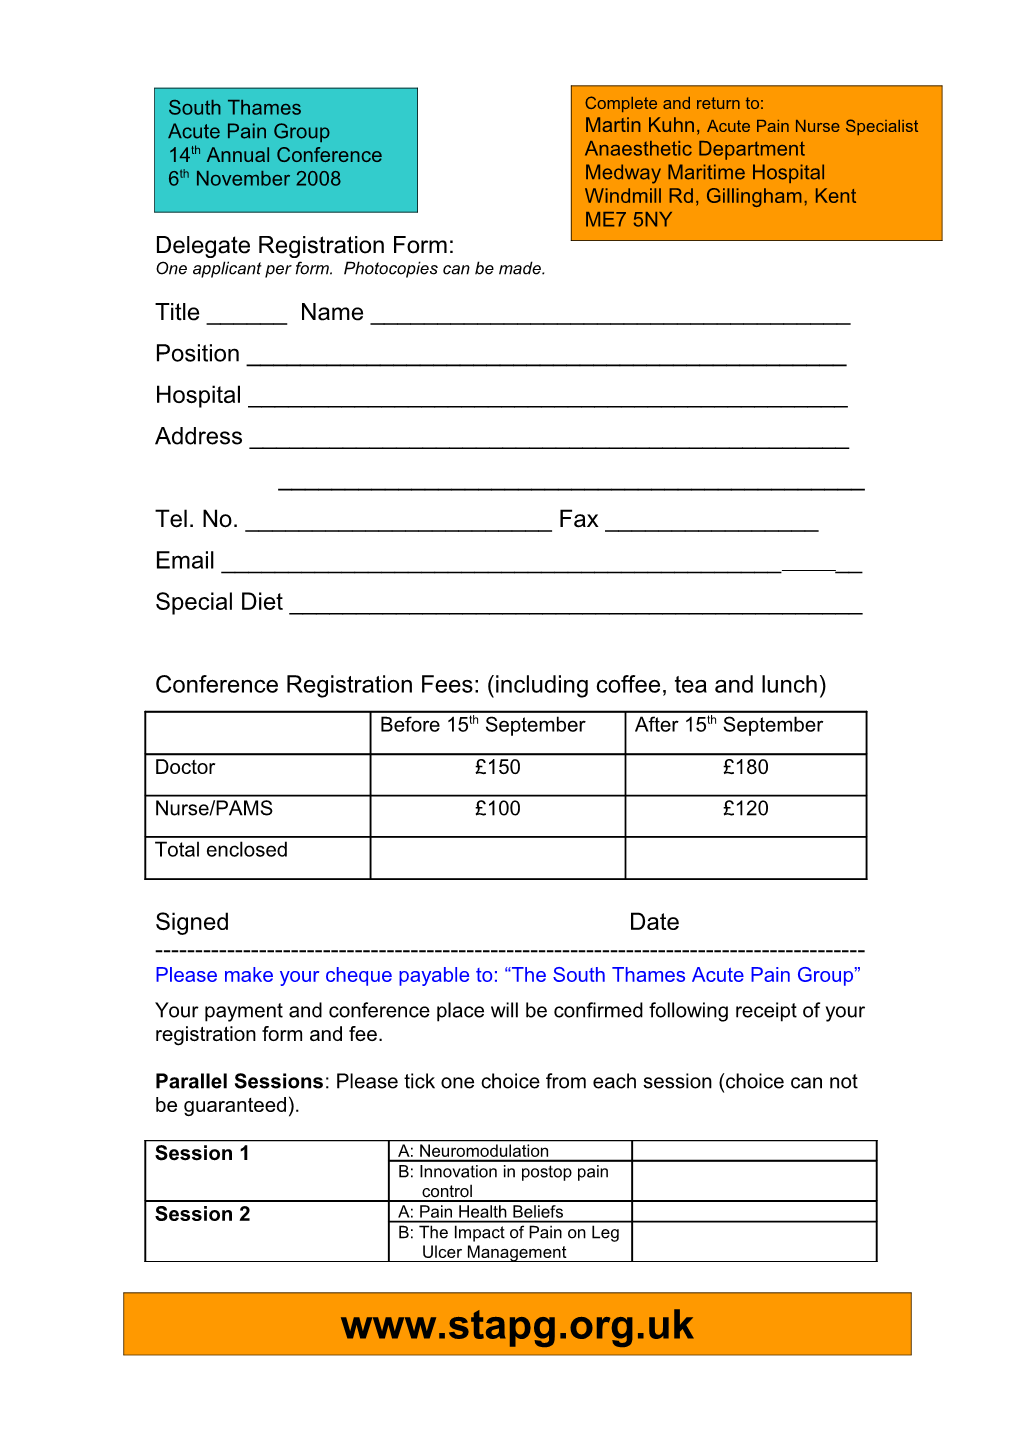 One Applicant Per Form. Photocopies Can Be Made